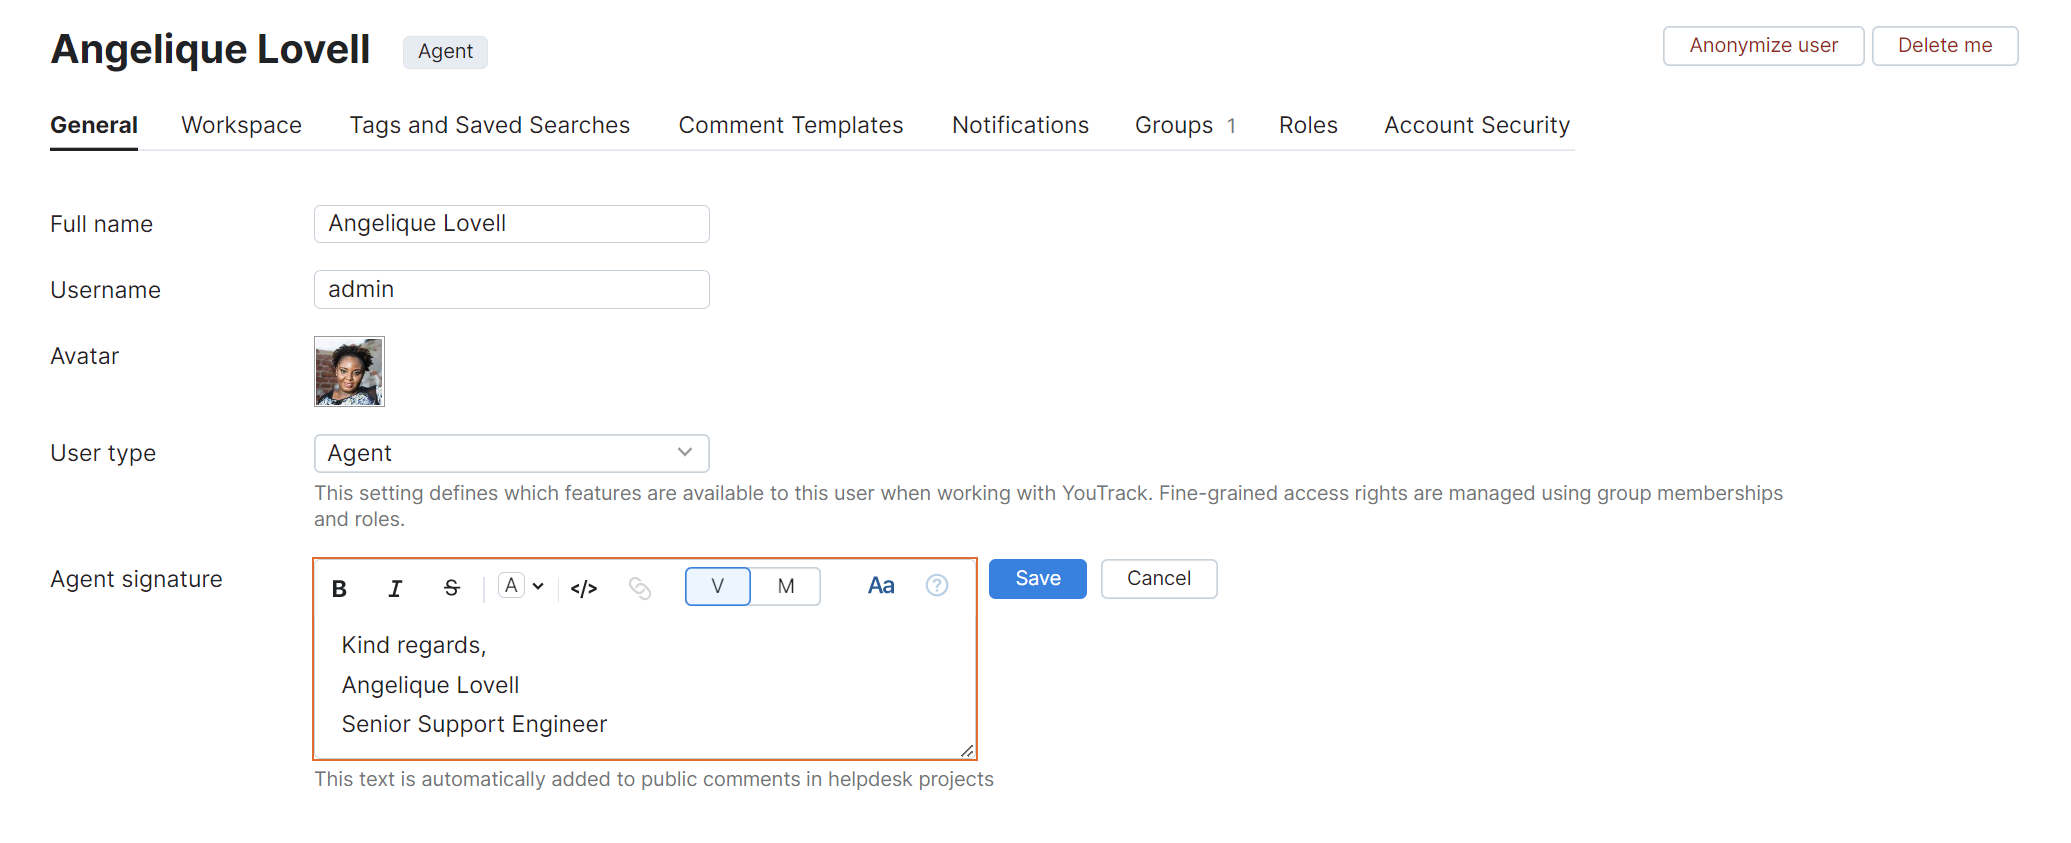 The Agent signature setting in an agent's YouTrack profile.